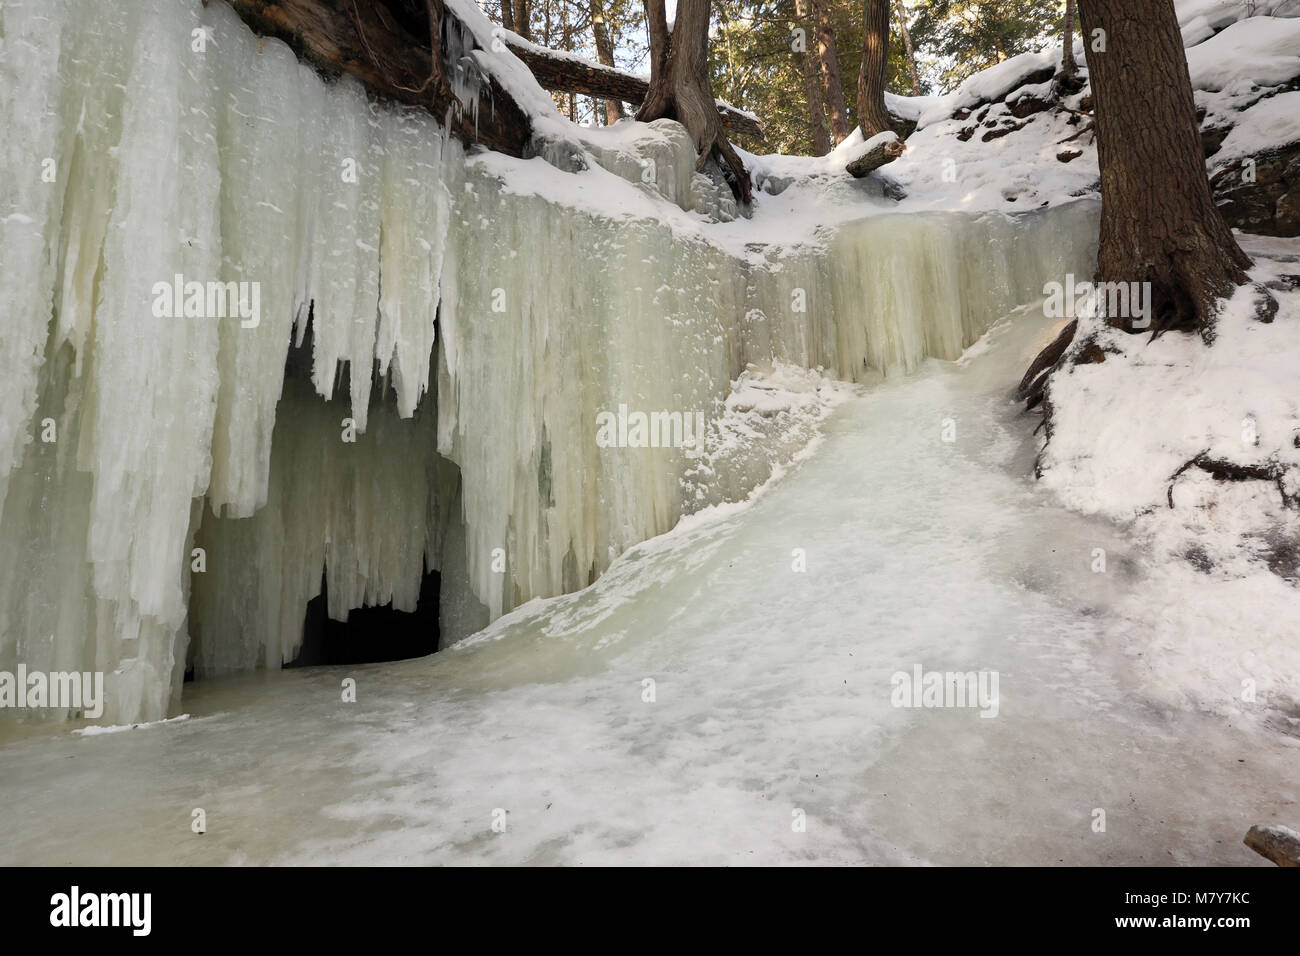 Eben Ice Caves in Michigan's Upper Peninsula spill over a rock ledge, like a waterfall, creating patterned ice curtains, near Eben Junction Michigan. Stock Photo